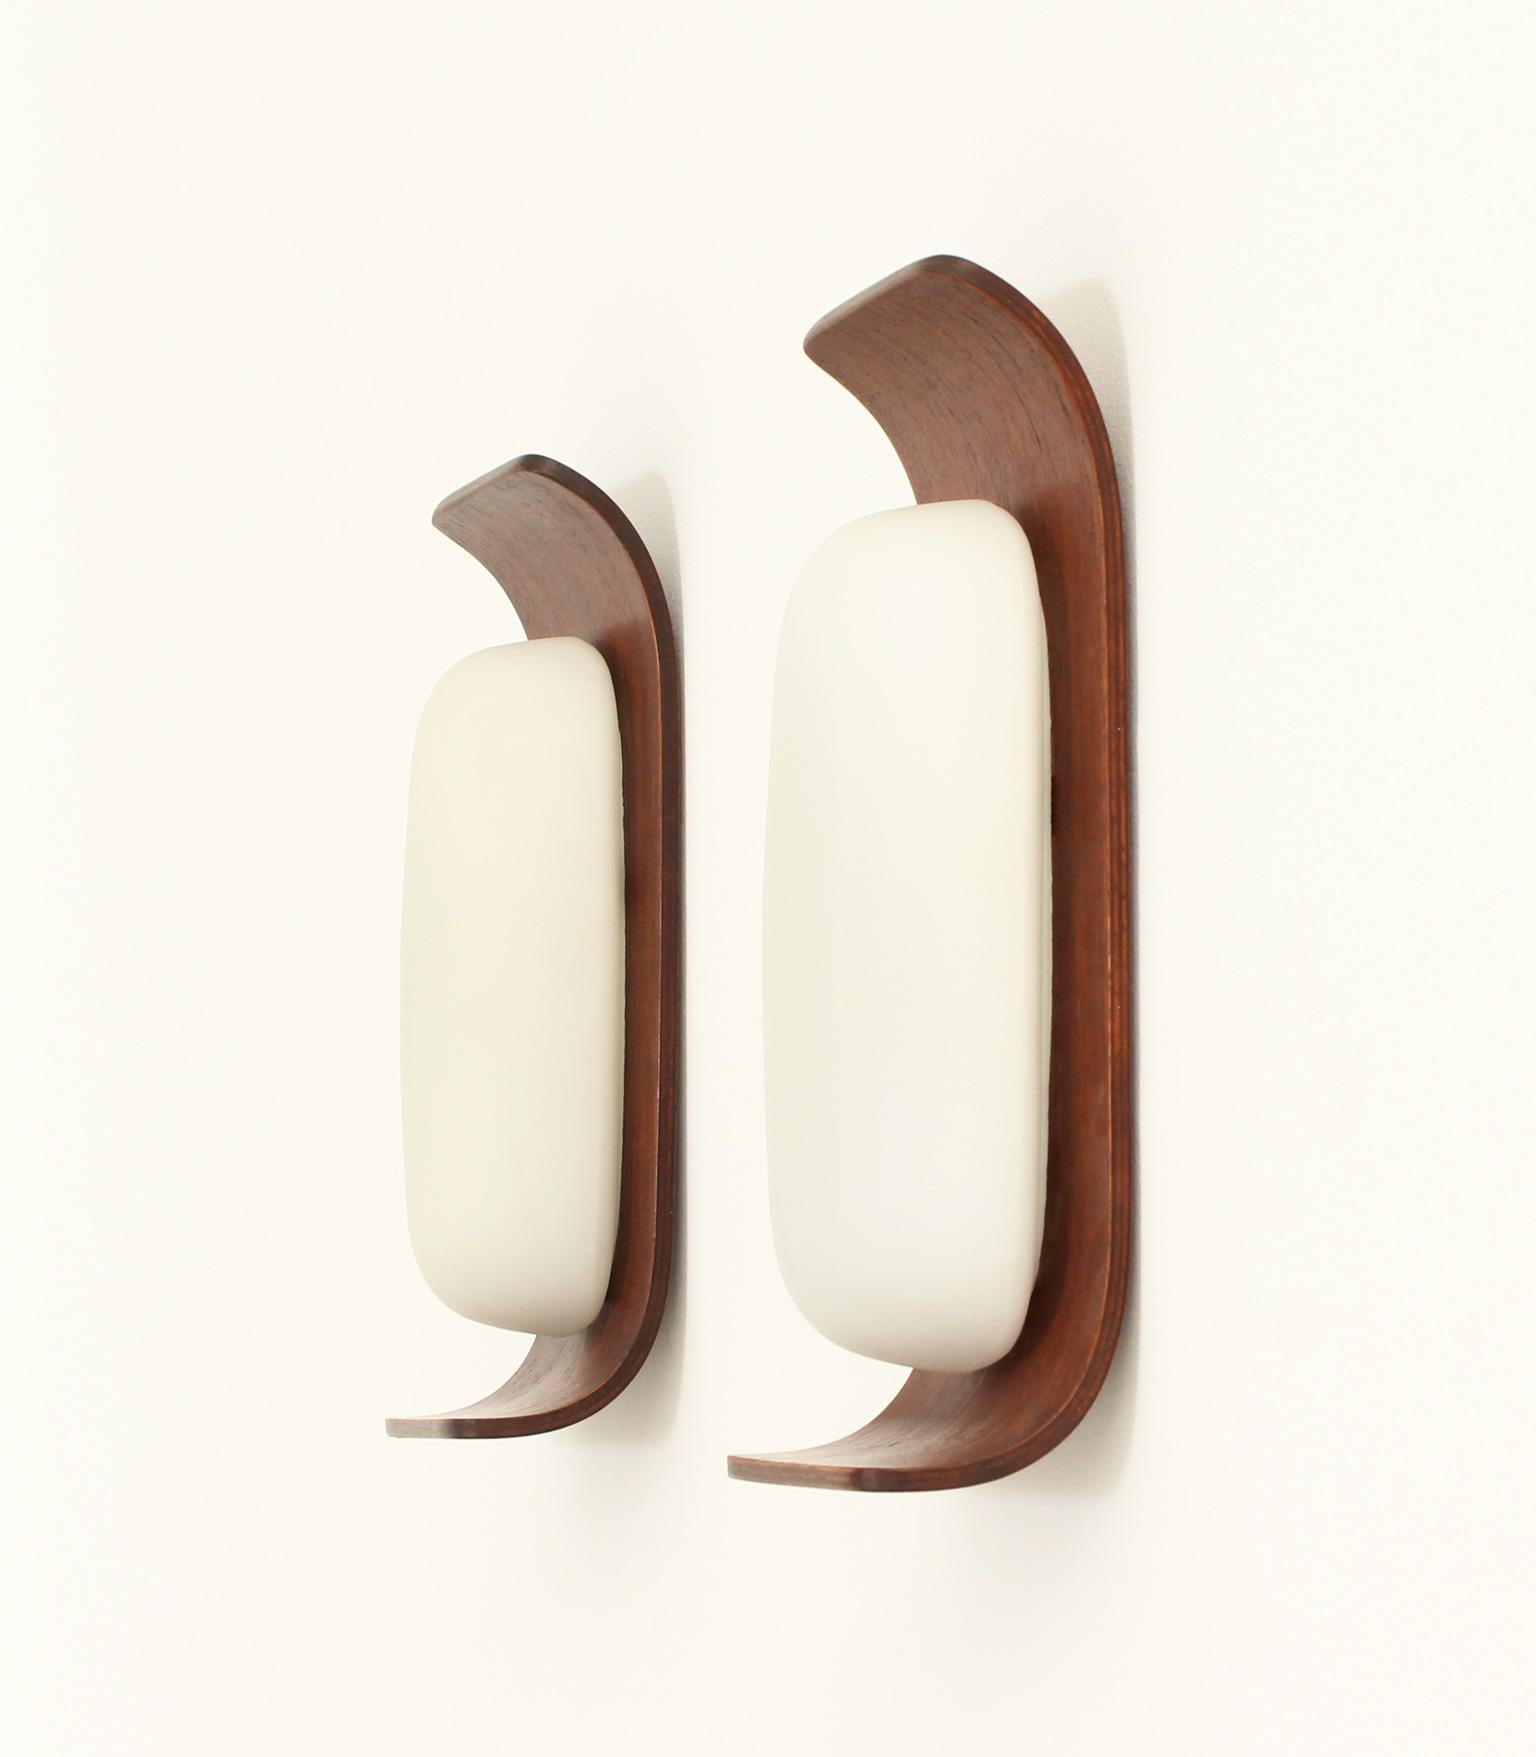 Pair of teak wood sconces designed by Goffredo Reggiani in 1960's, Italy. Teak plywood and opaline glass diffuser.